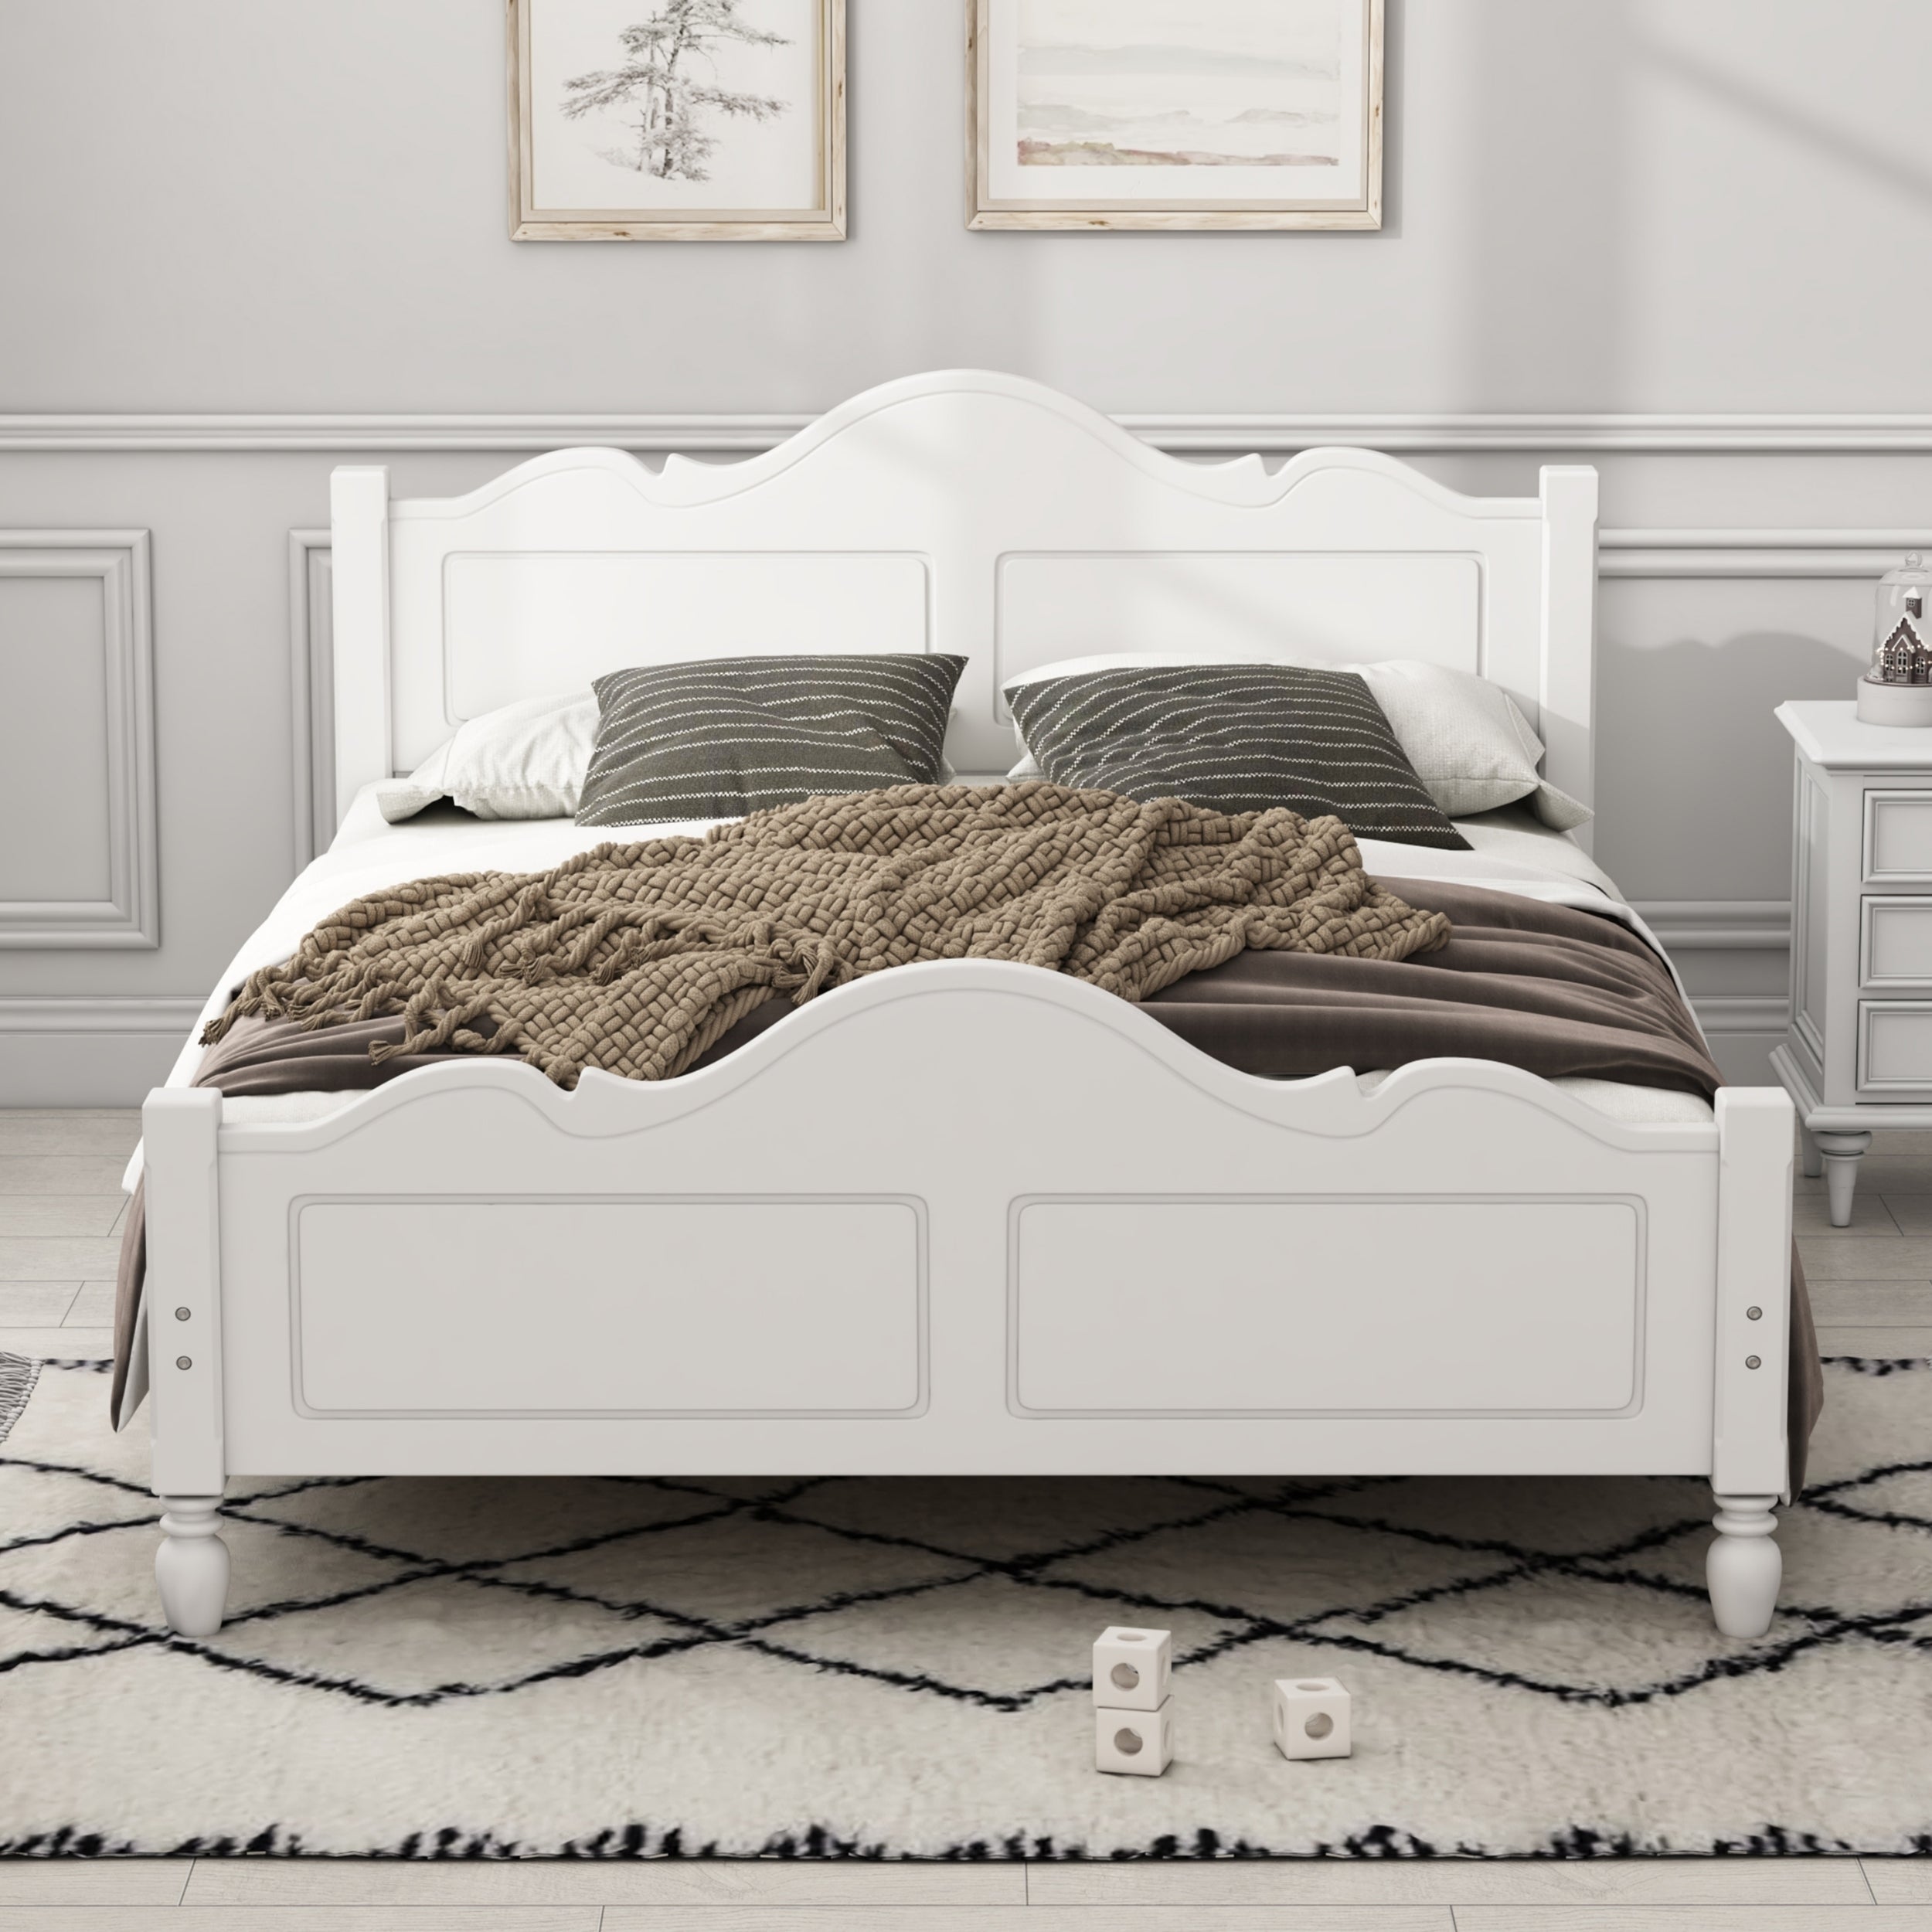 Traditional-Concise-Style-Solid-Wood-Platform-Bed,-No-Need-Box-Spring,-White-Queen-Beds-&-Bed-Frames